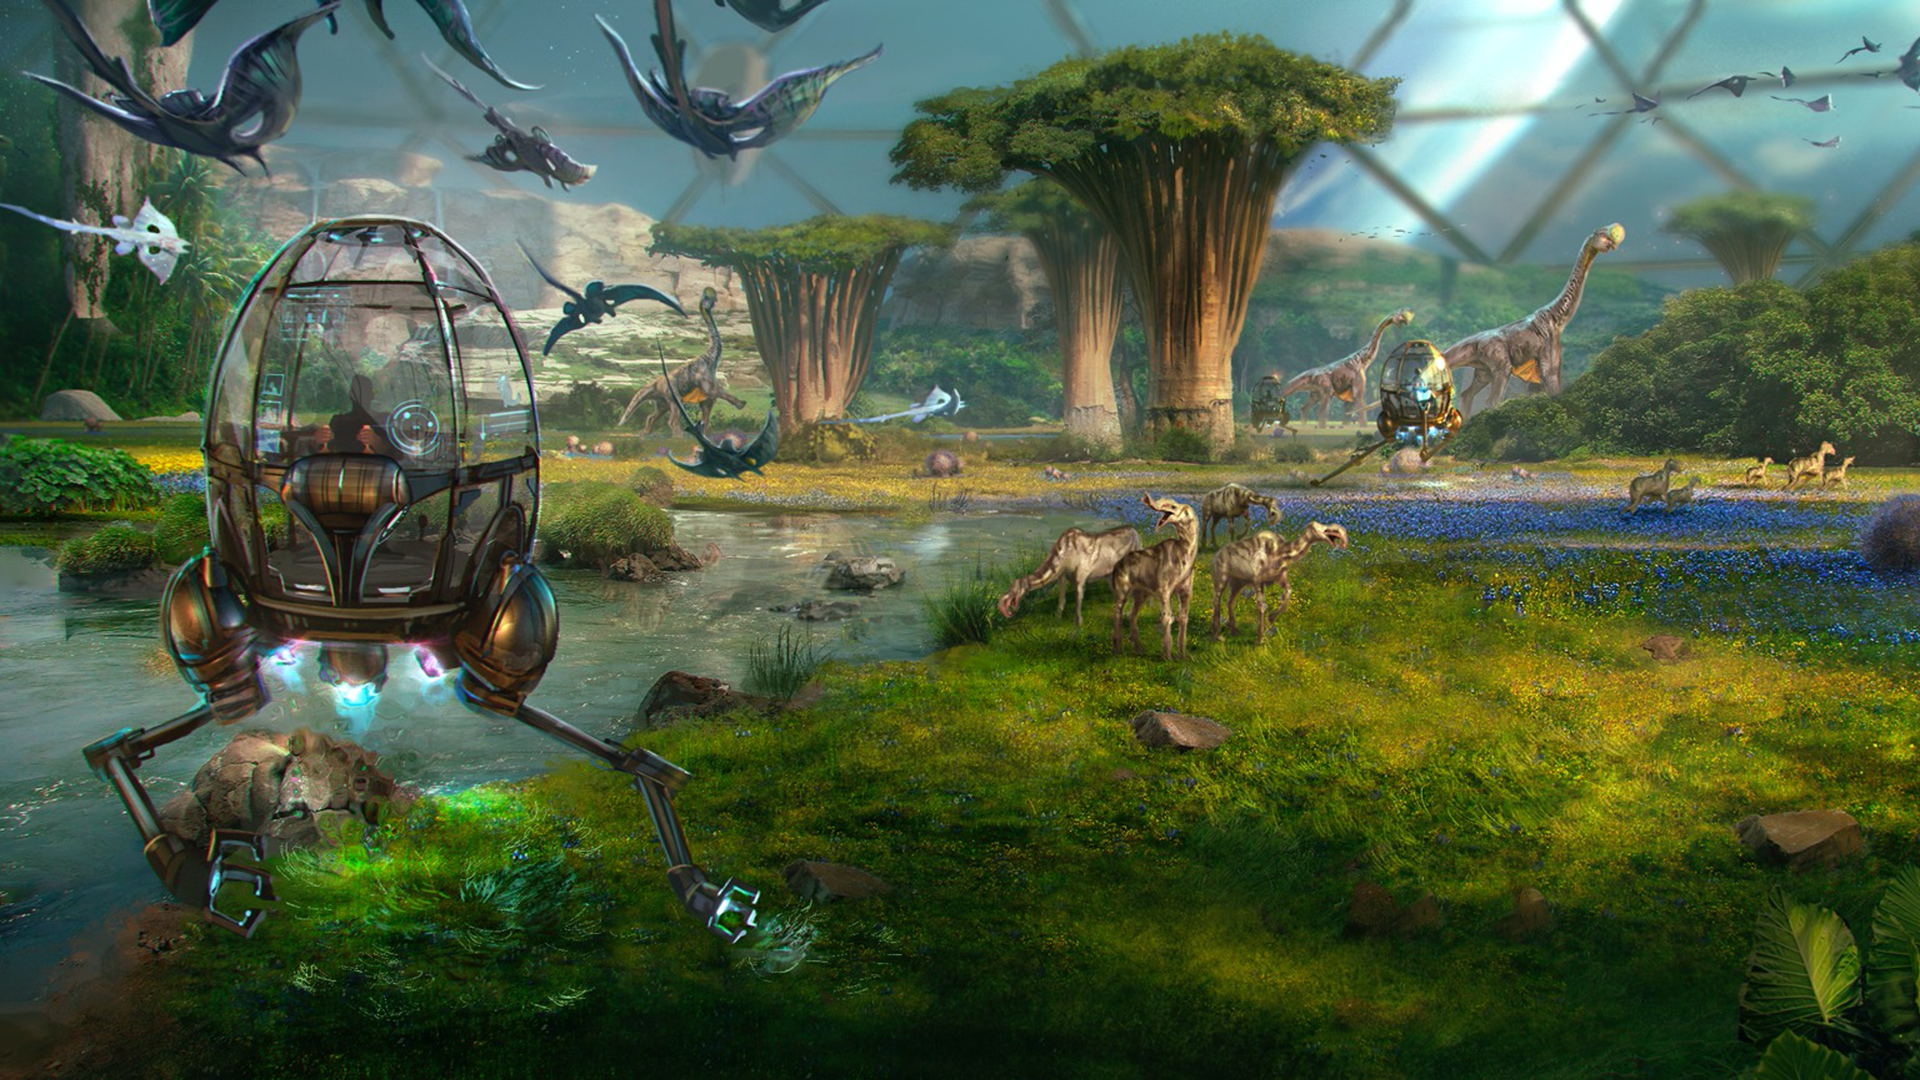 Screenshot of art from a virtual world created by Dreamscape